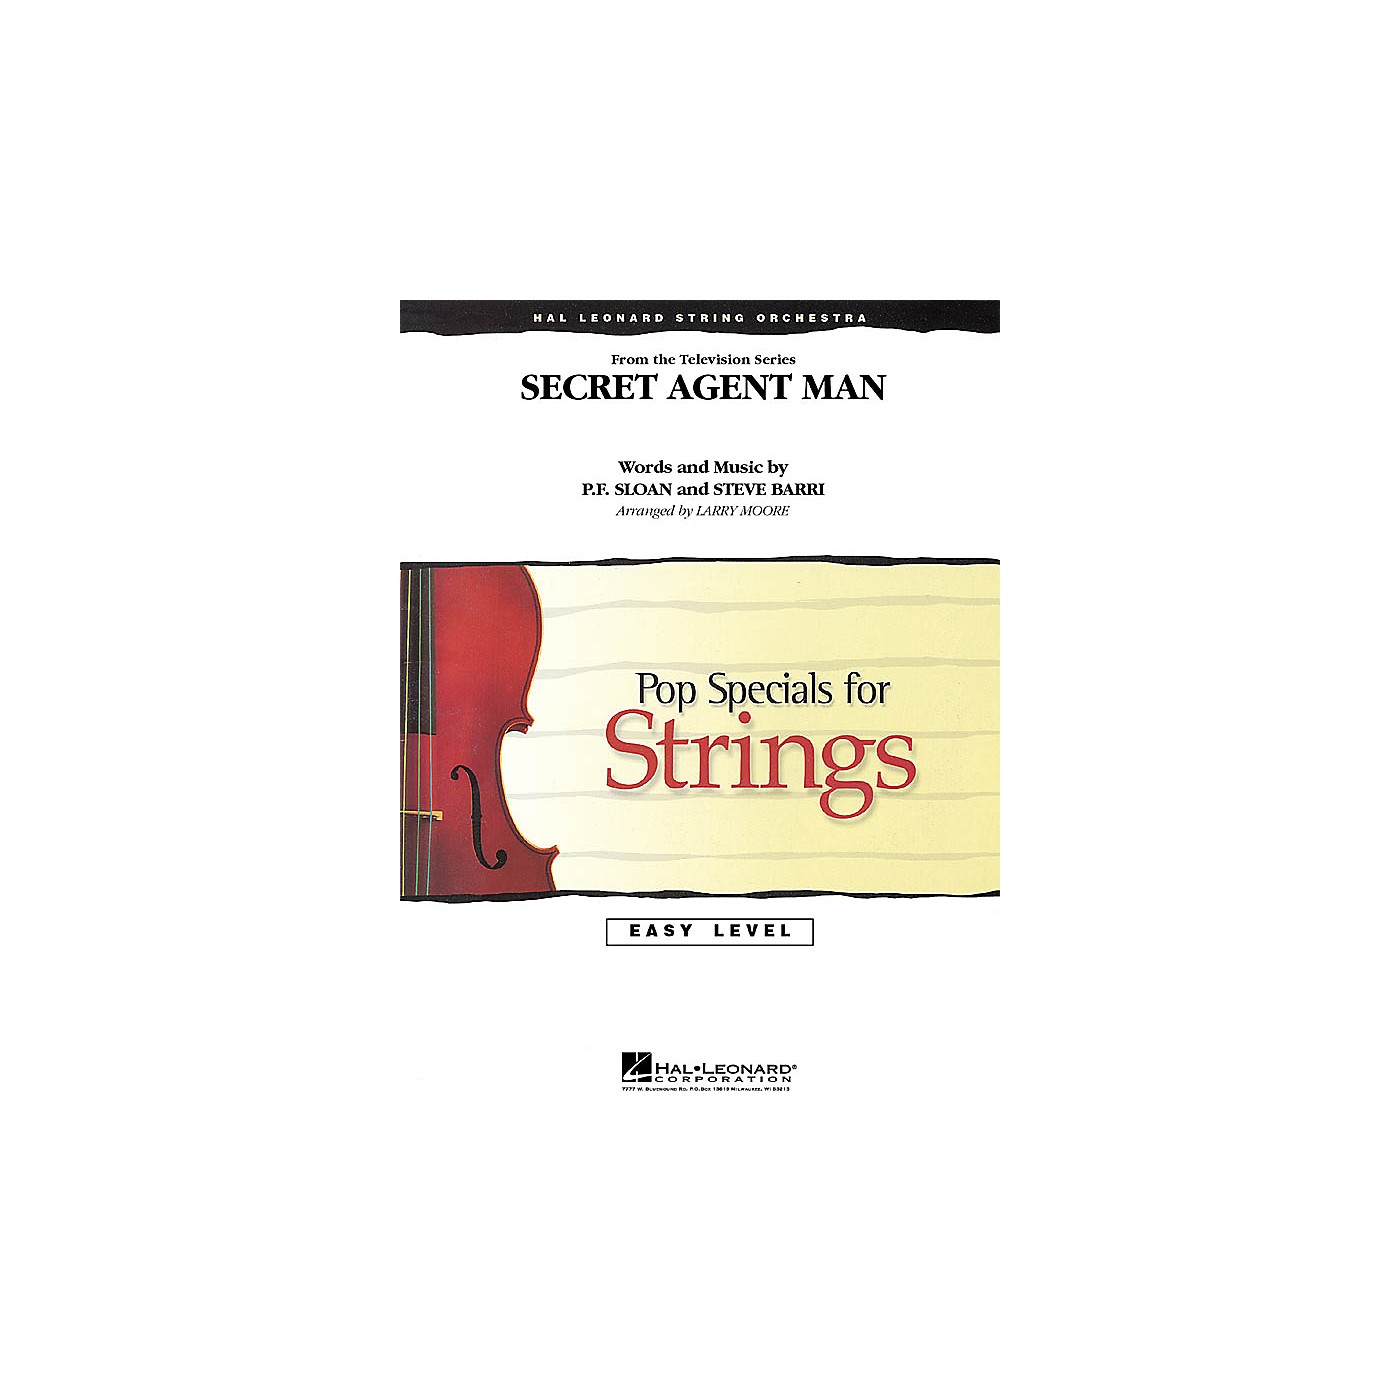 Hal Leonard Secret Agent Man Easy Pop Specials For Strings Series Softcover Arranged by Larry Moore thumbnail